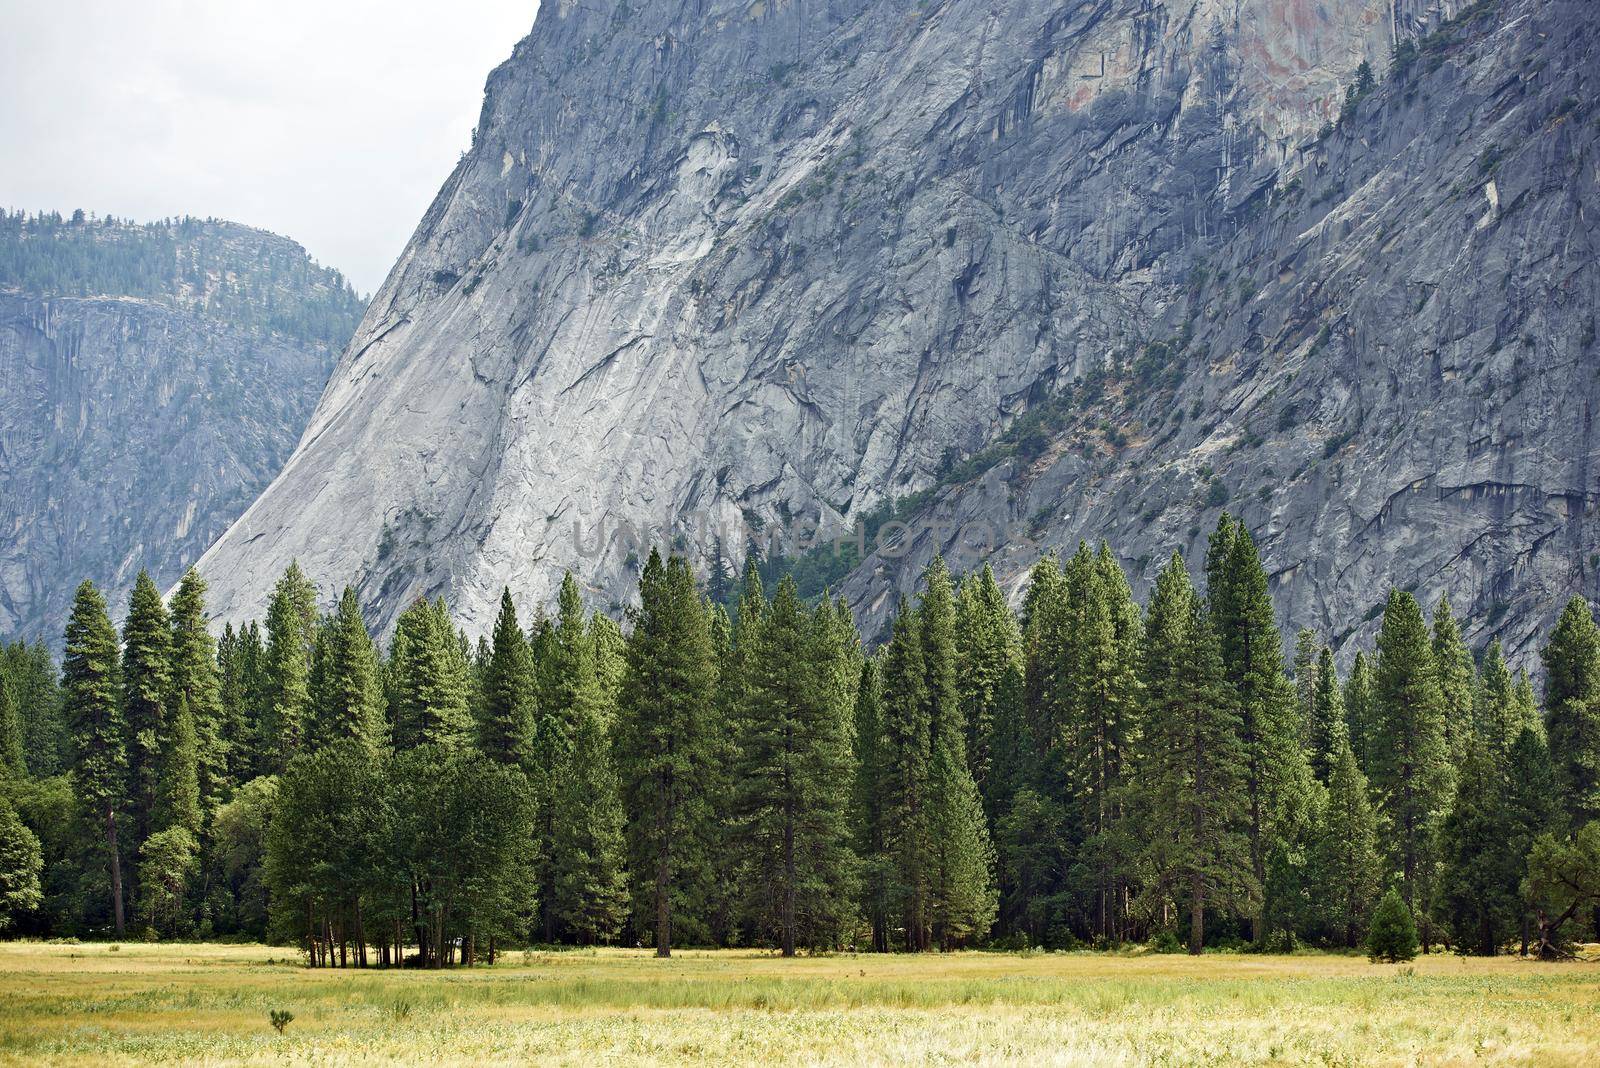 Yosemite Valley Meadow. Yosemite National Park, California, USA. American National Parks Photography Collection.